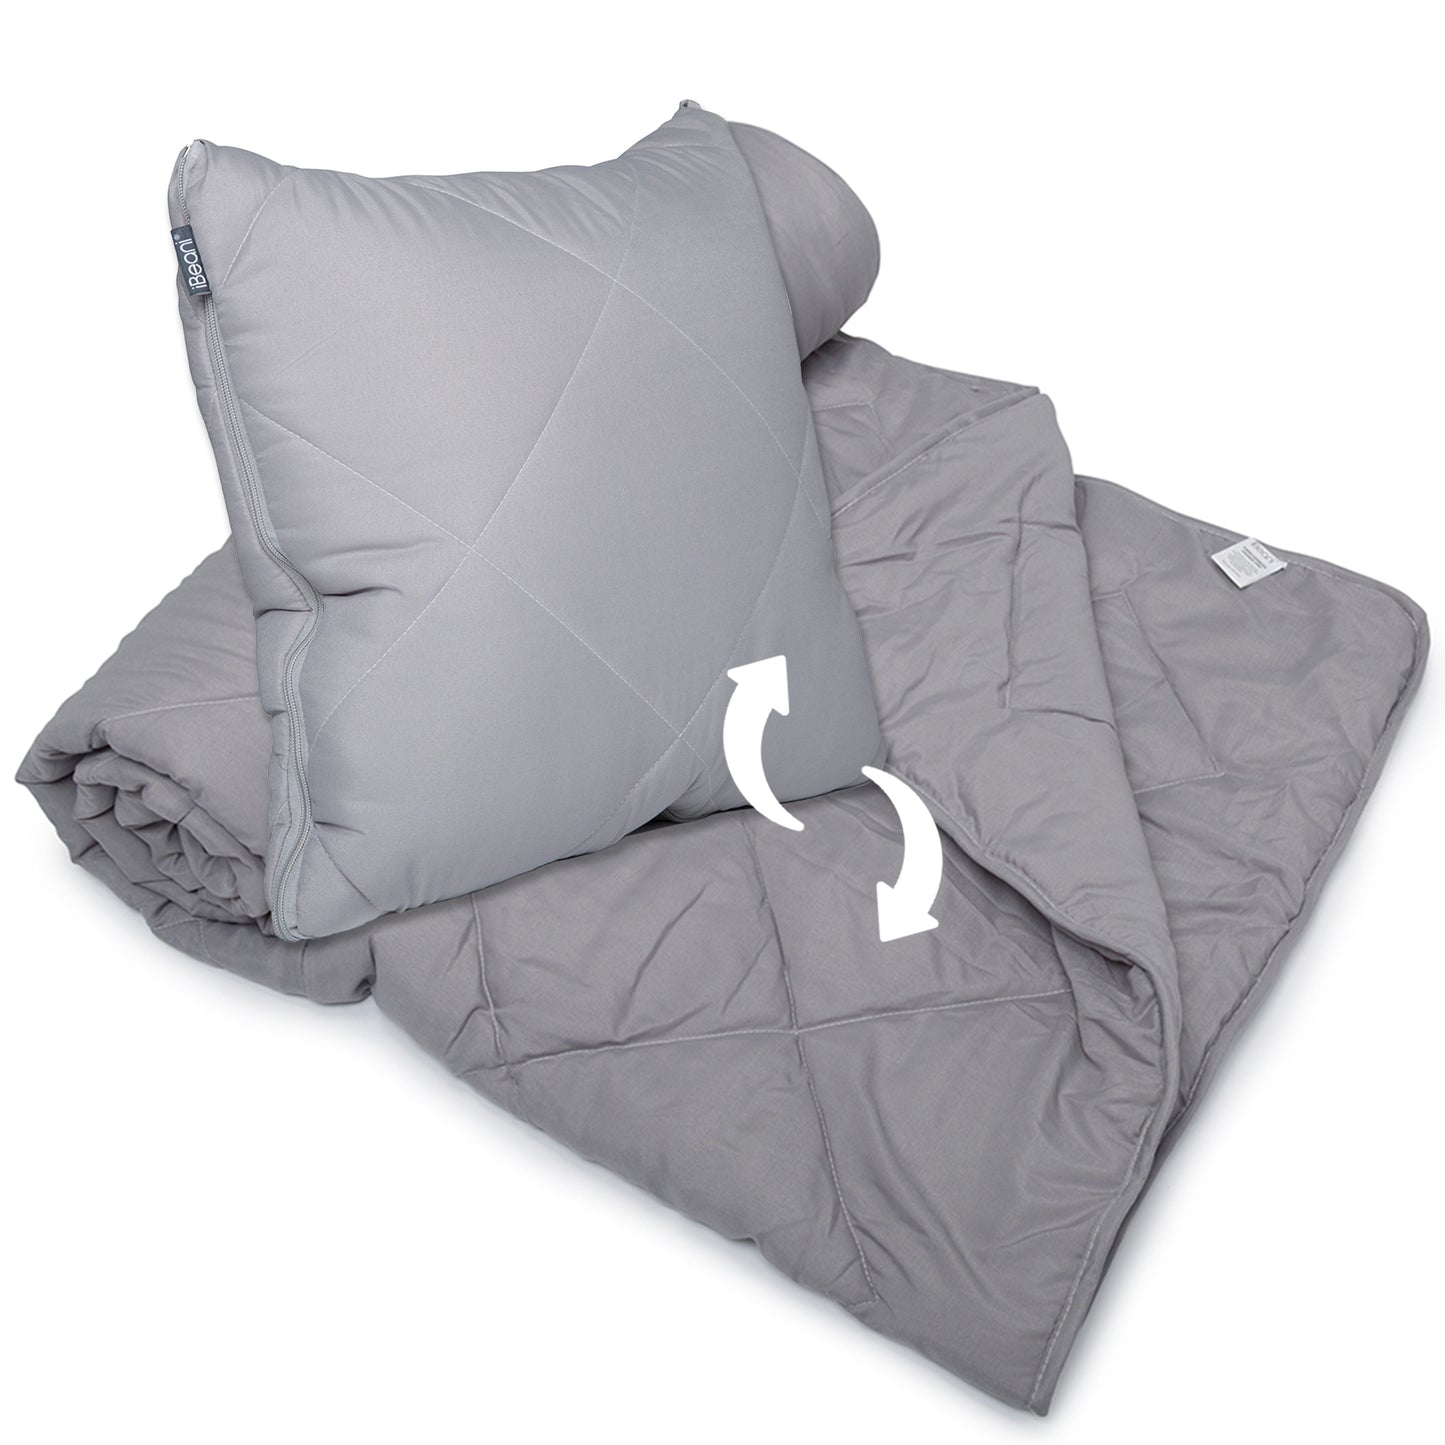 Quishion – 2 in 1 Scatter Cushion & Cozy Blanket, Quilt or Throw